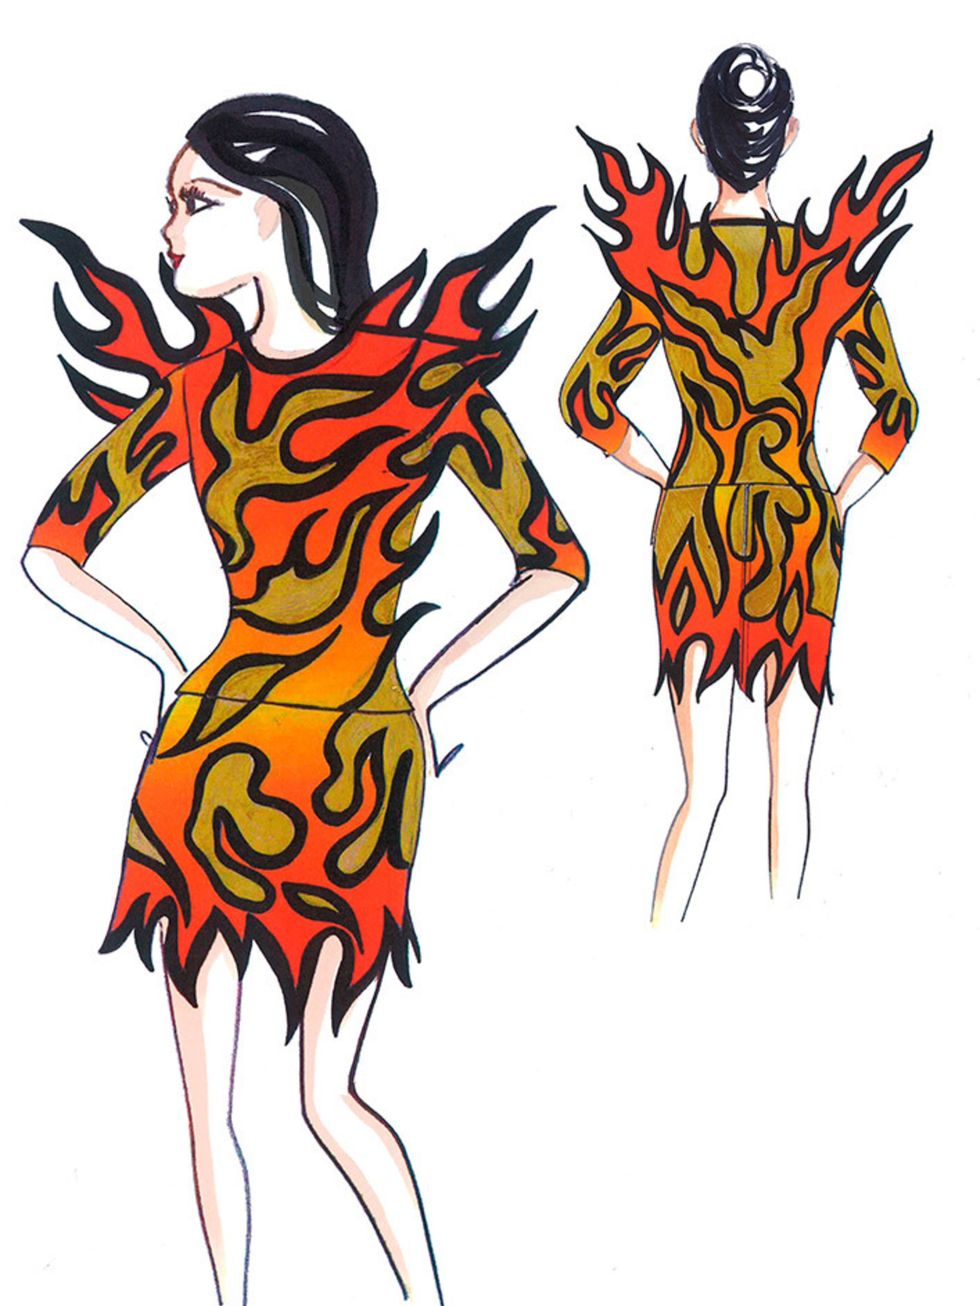 Opening with Roar, Katy wore a patent leather flame mini dress with cut outs and glitter gold leather appliqué detail.